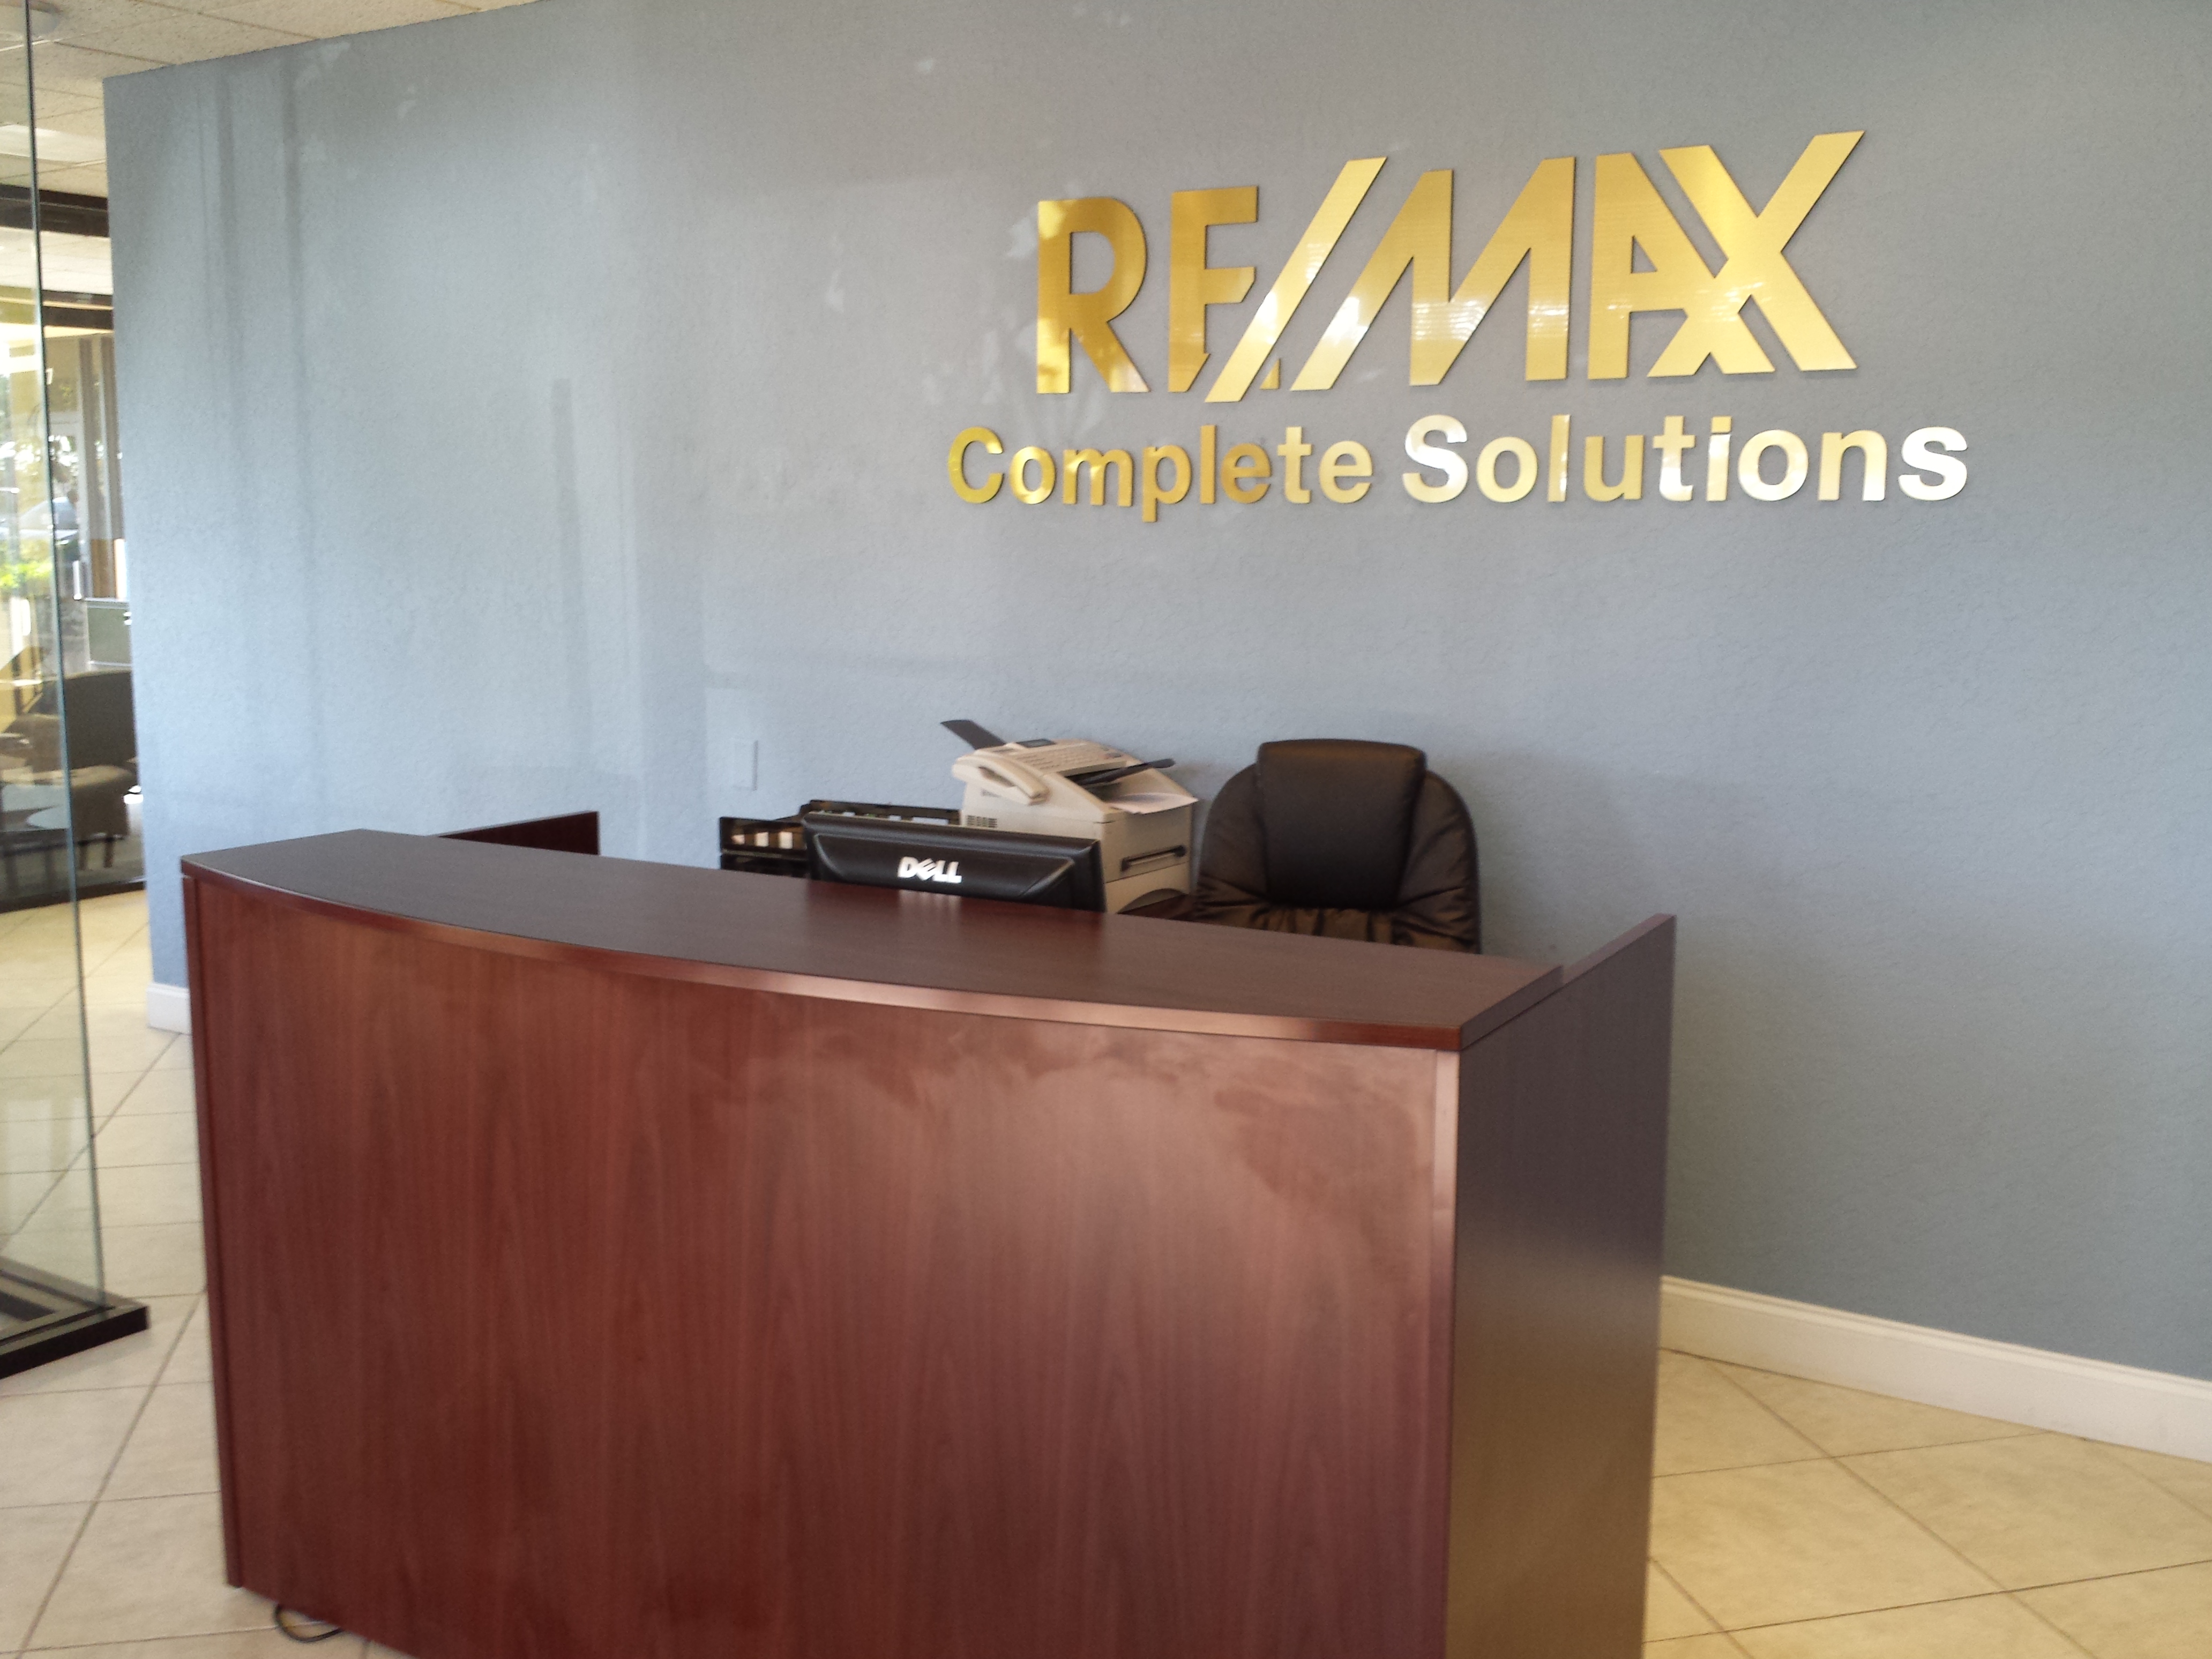 RE/MAX Complete Solutions Photo